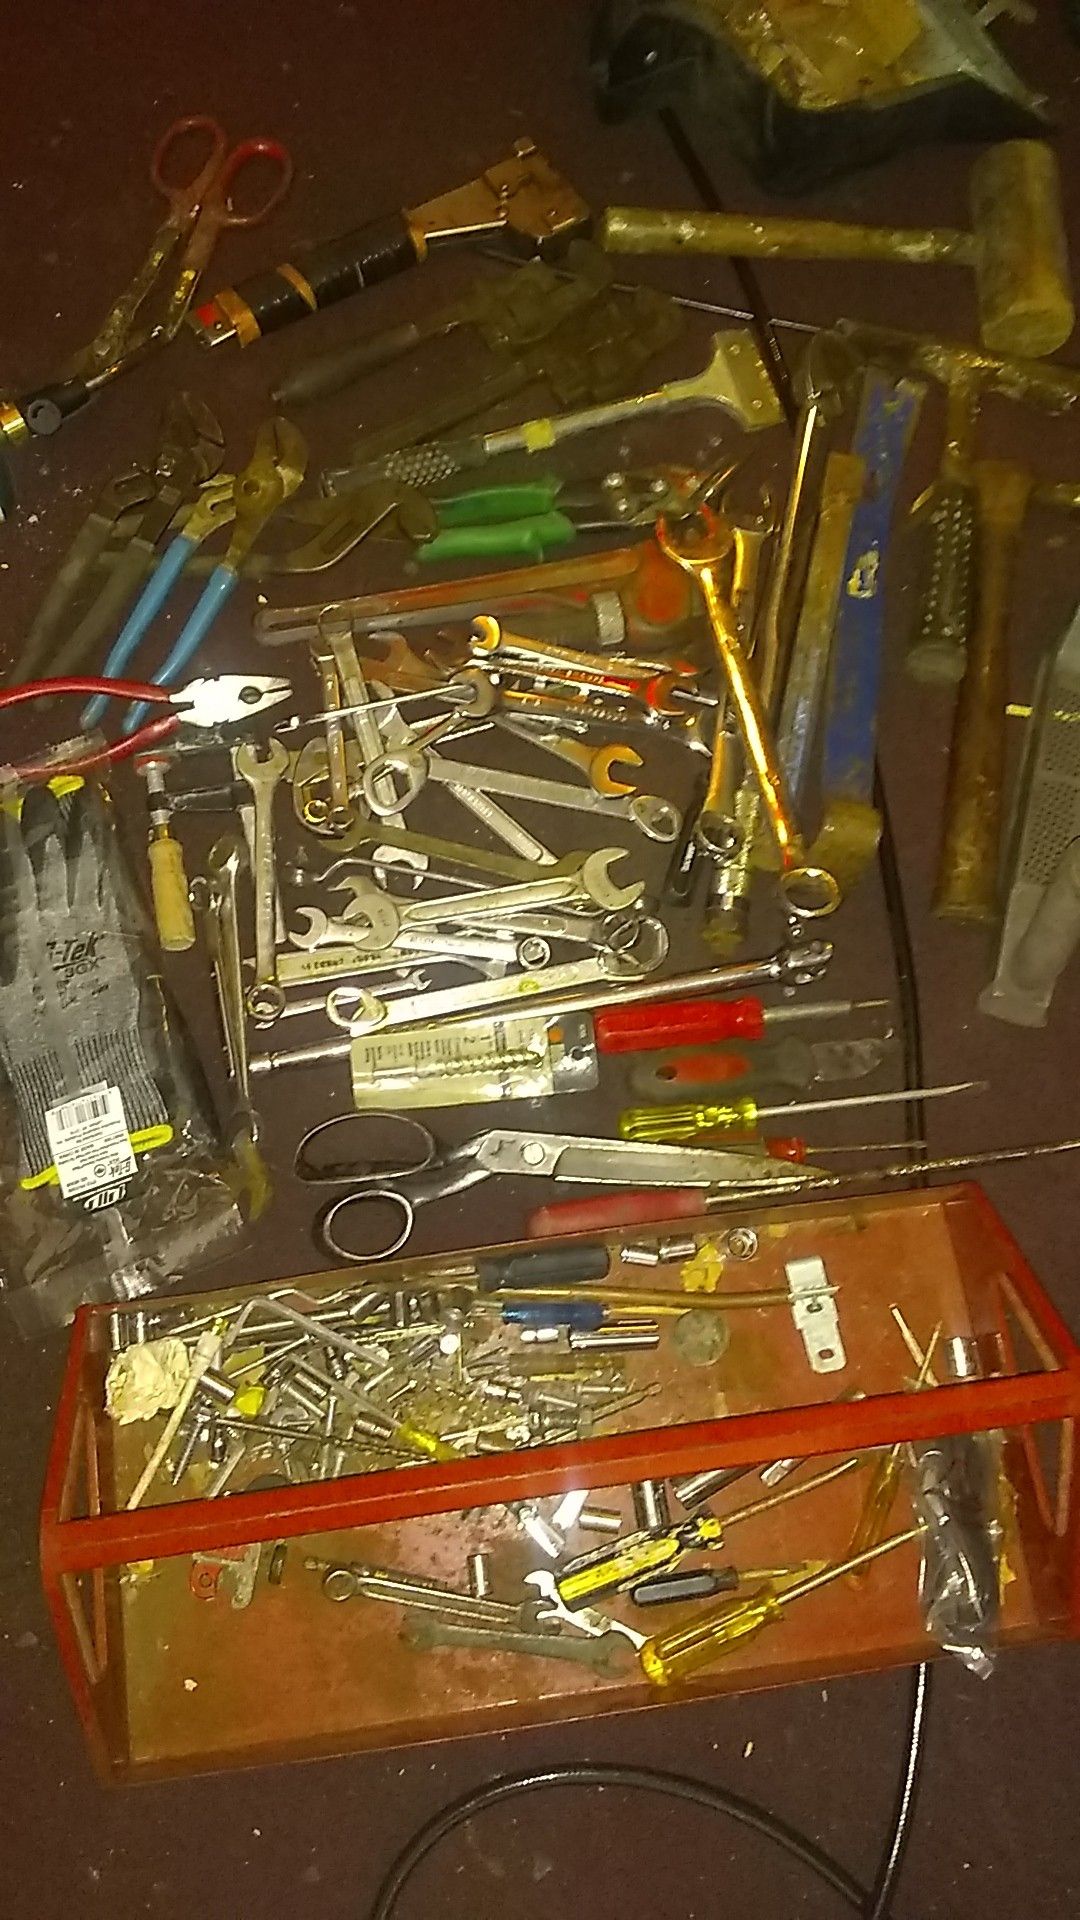 Tools , wrenches snd alot more all for $40